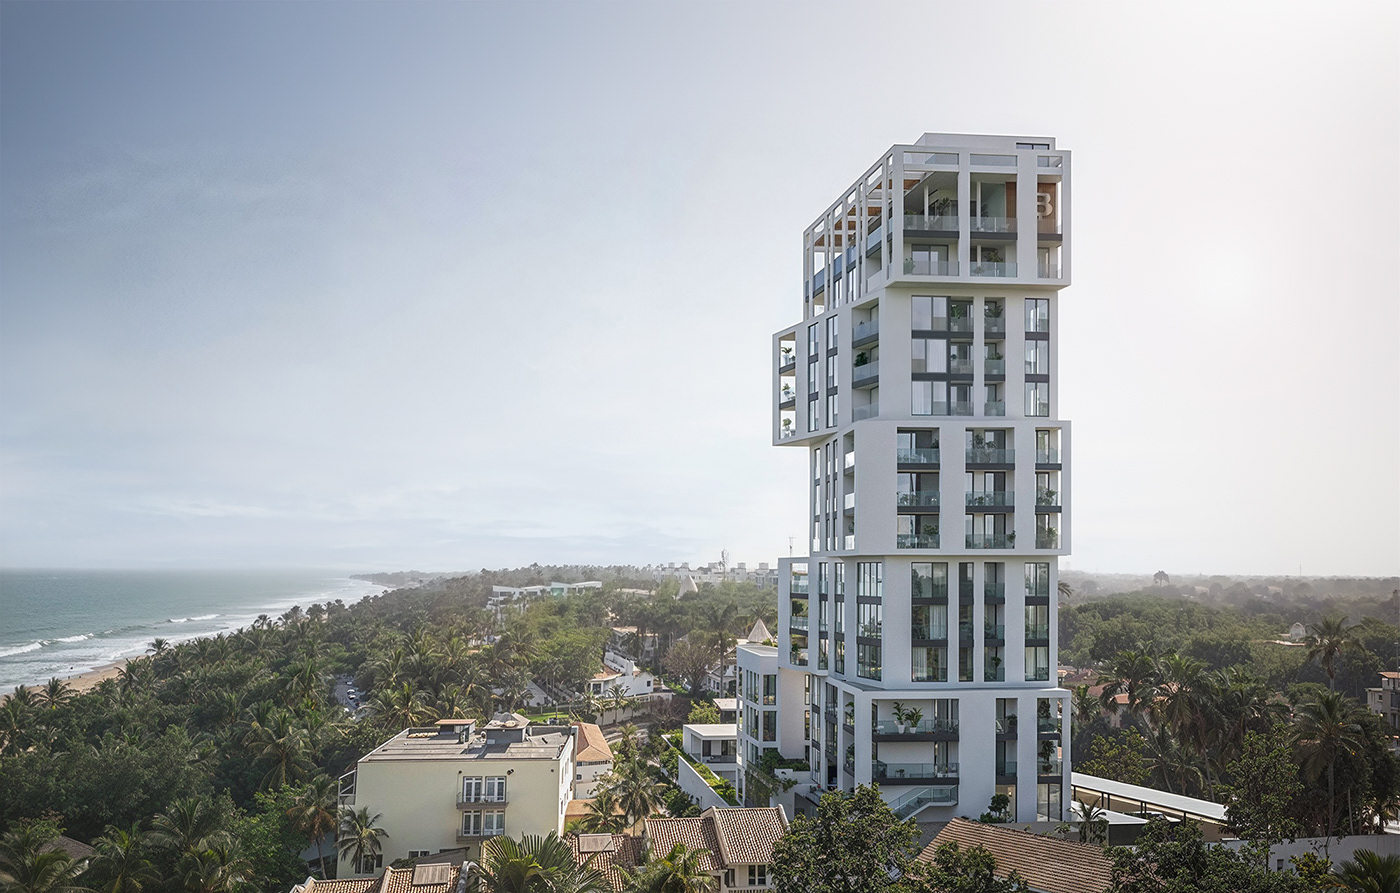 Modern, multi-storey residential building on a coastal landscape with a broad view of a beach